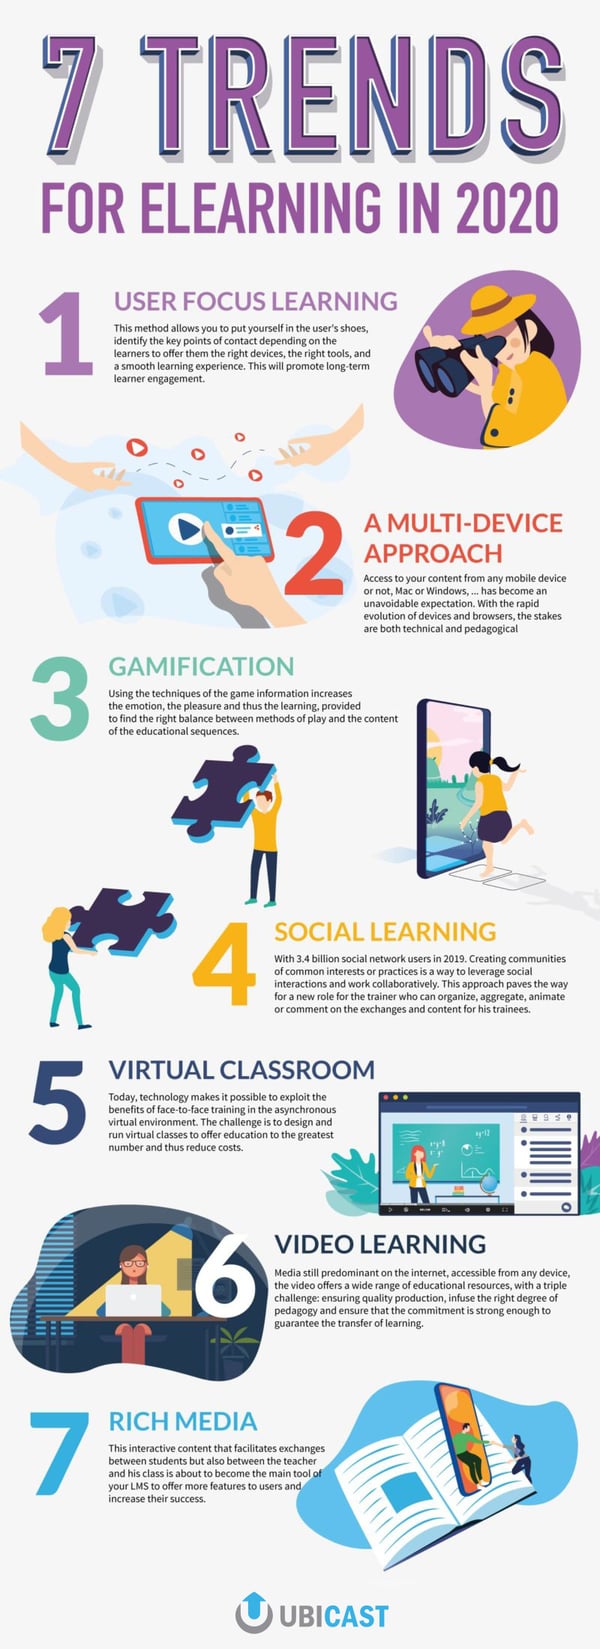 7 trends for eLearning in 2020